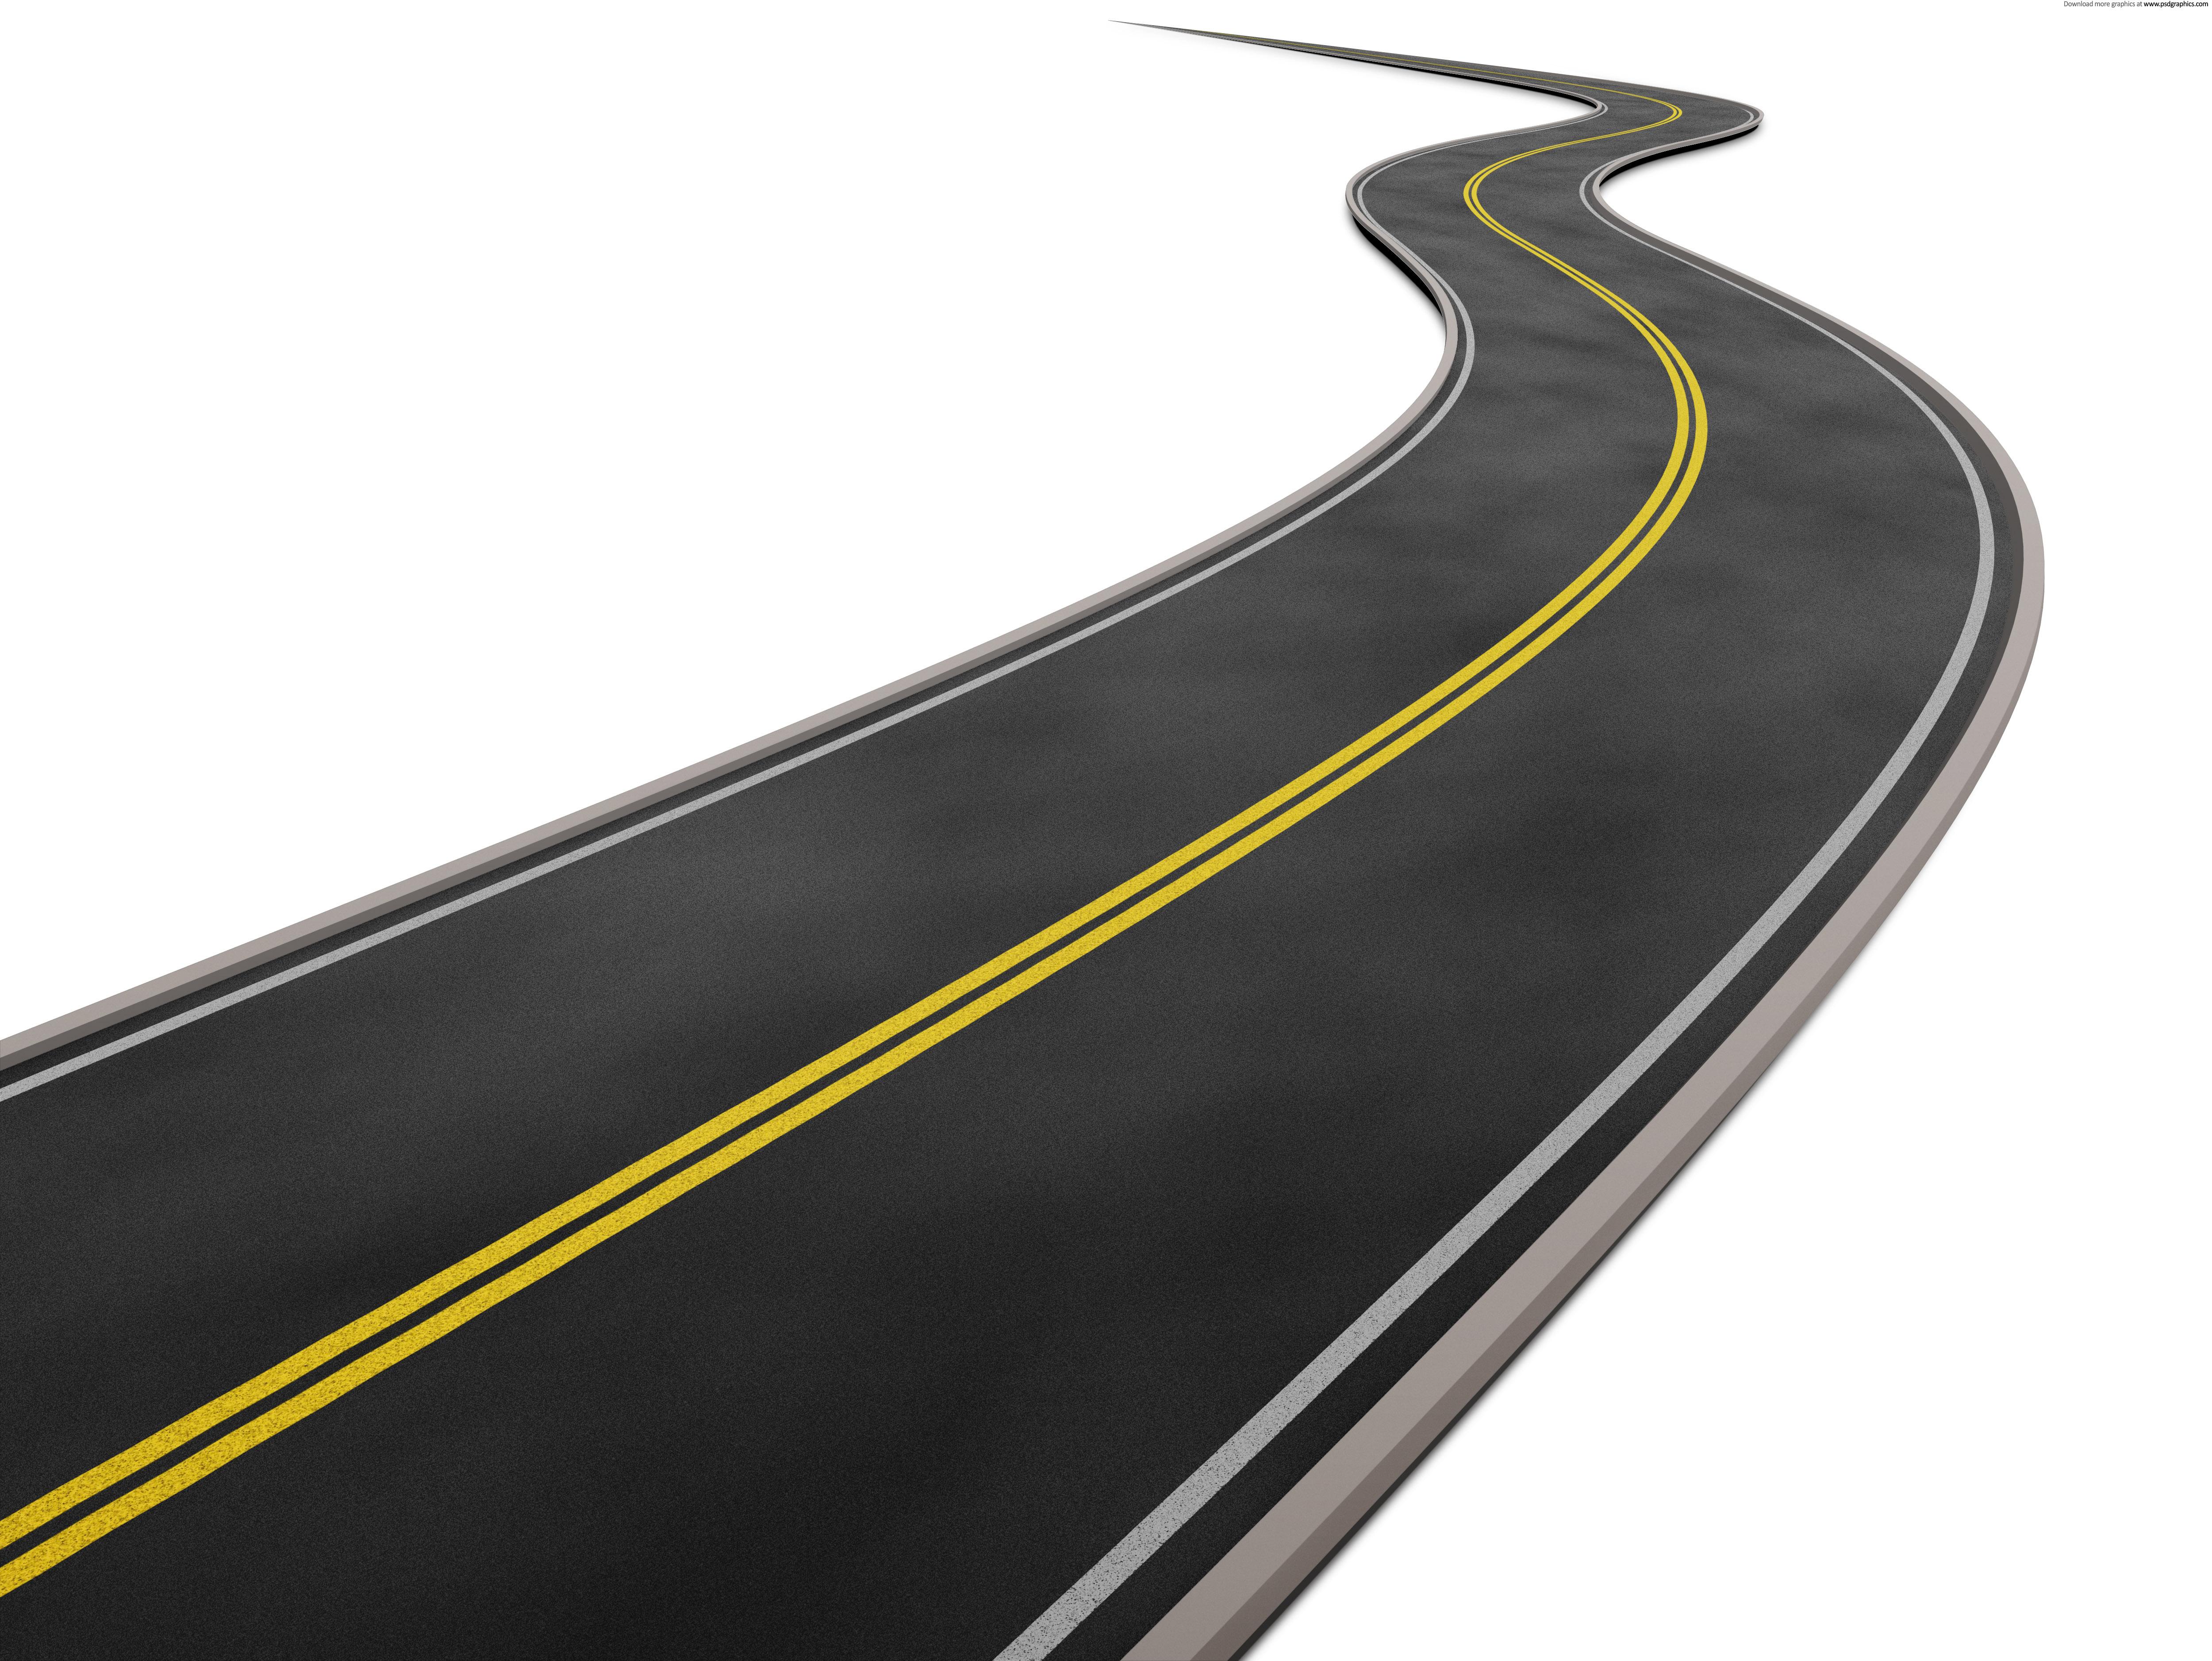 Curved Road On White Background   Psdgraphics